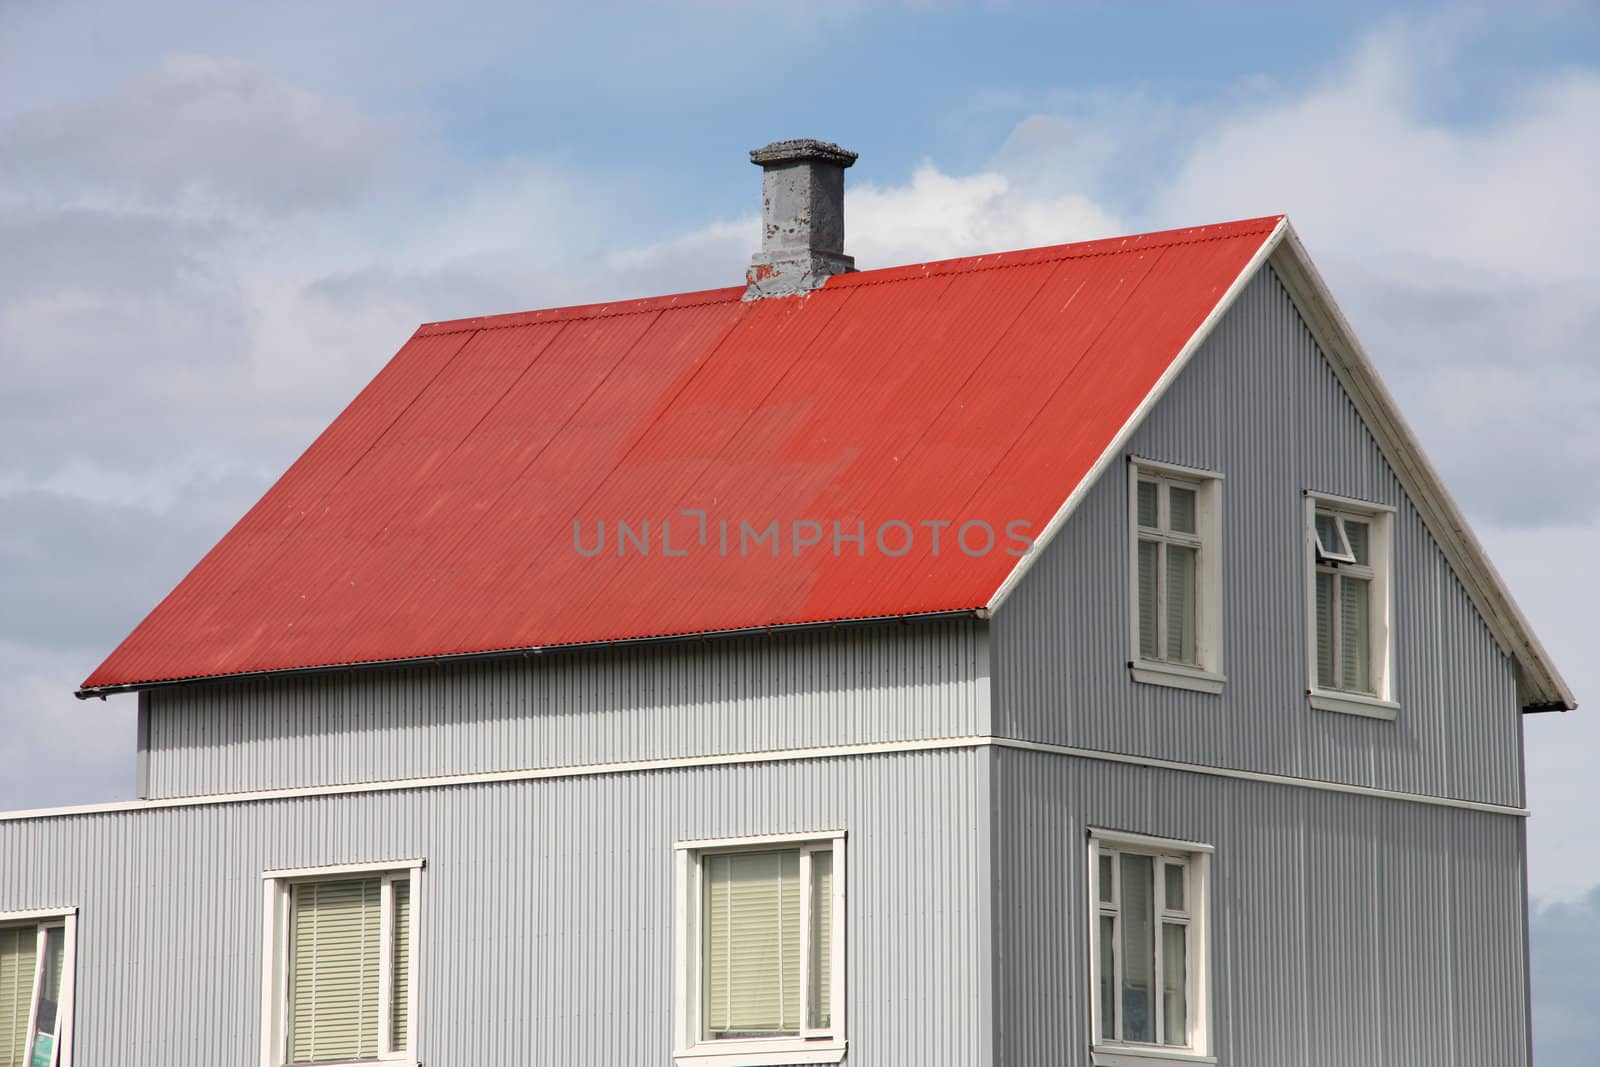 Small red roofed generic home in Iceland. Corrugated tin walls. Typical Nordic residential architecture.